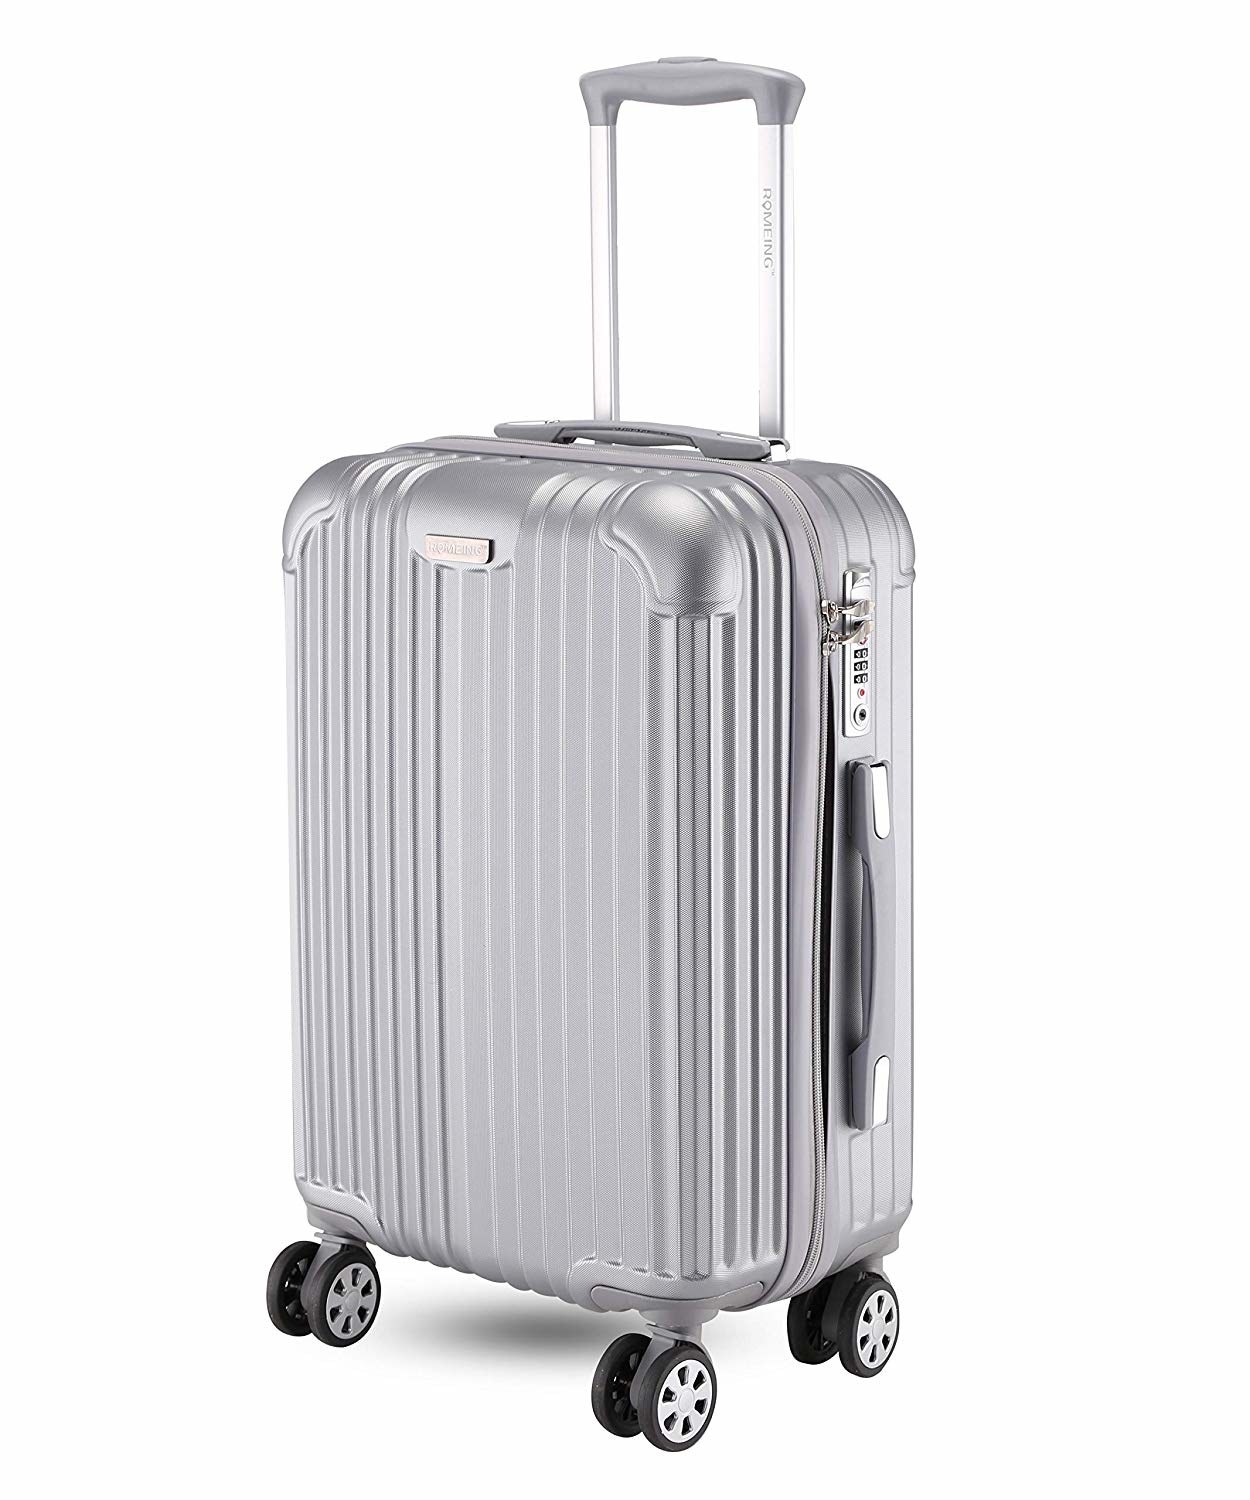 ROMEING Sicily 24 inch, Polypropylene Luggage, Hard-Sided, (Sky Blue 65  cms) Check-in Trolley Bag - Price History